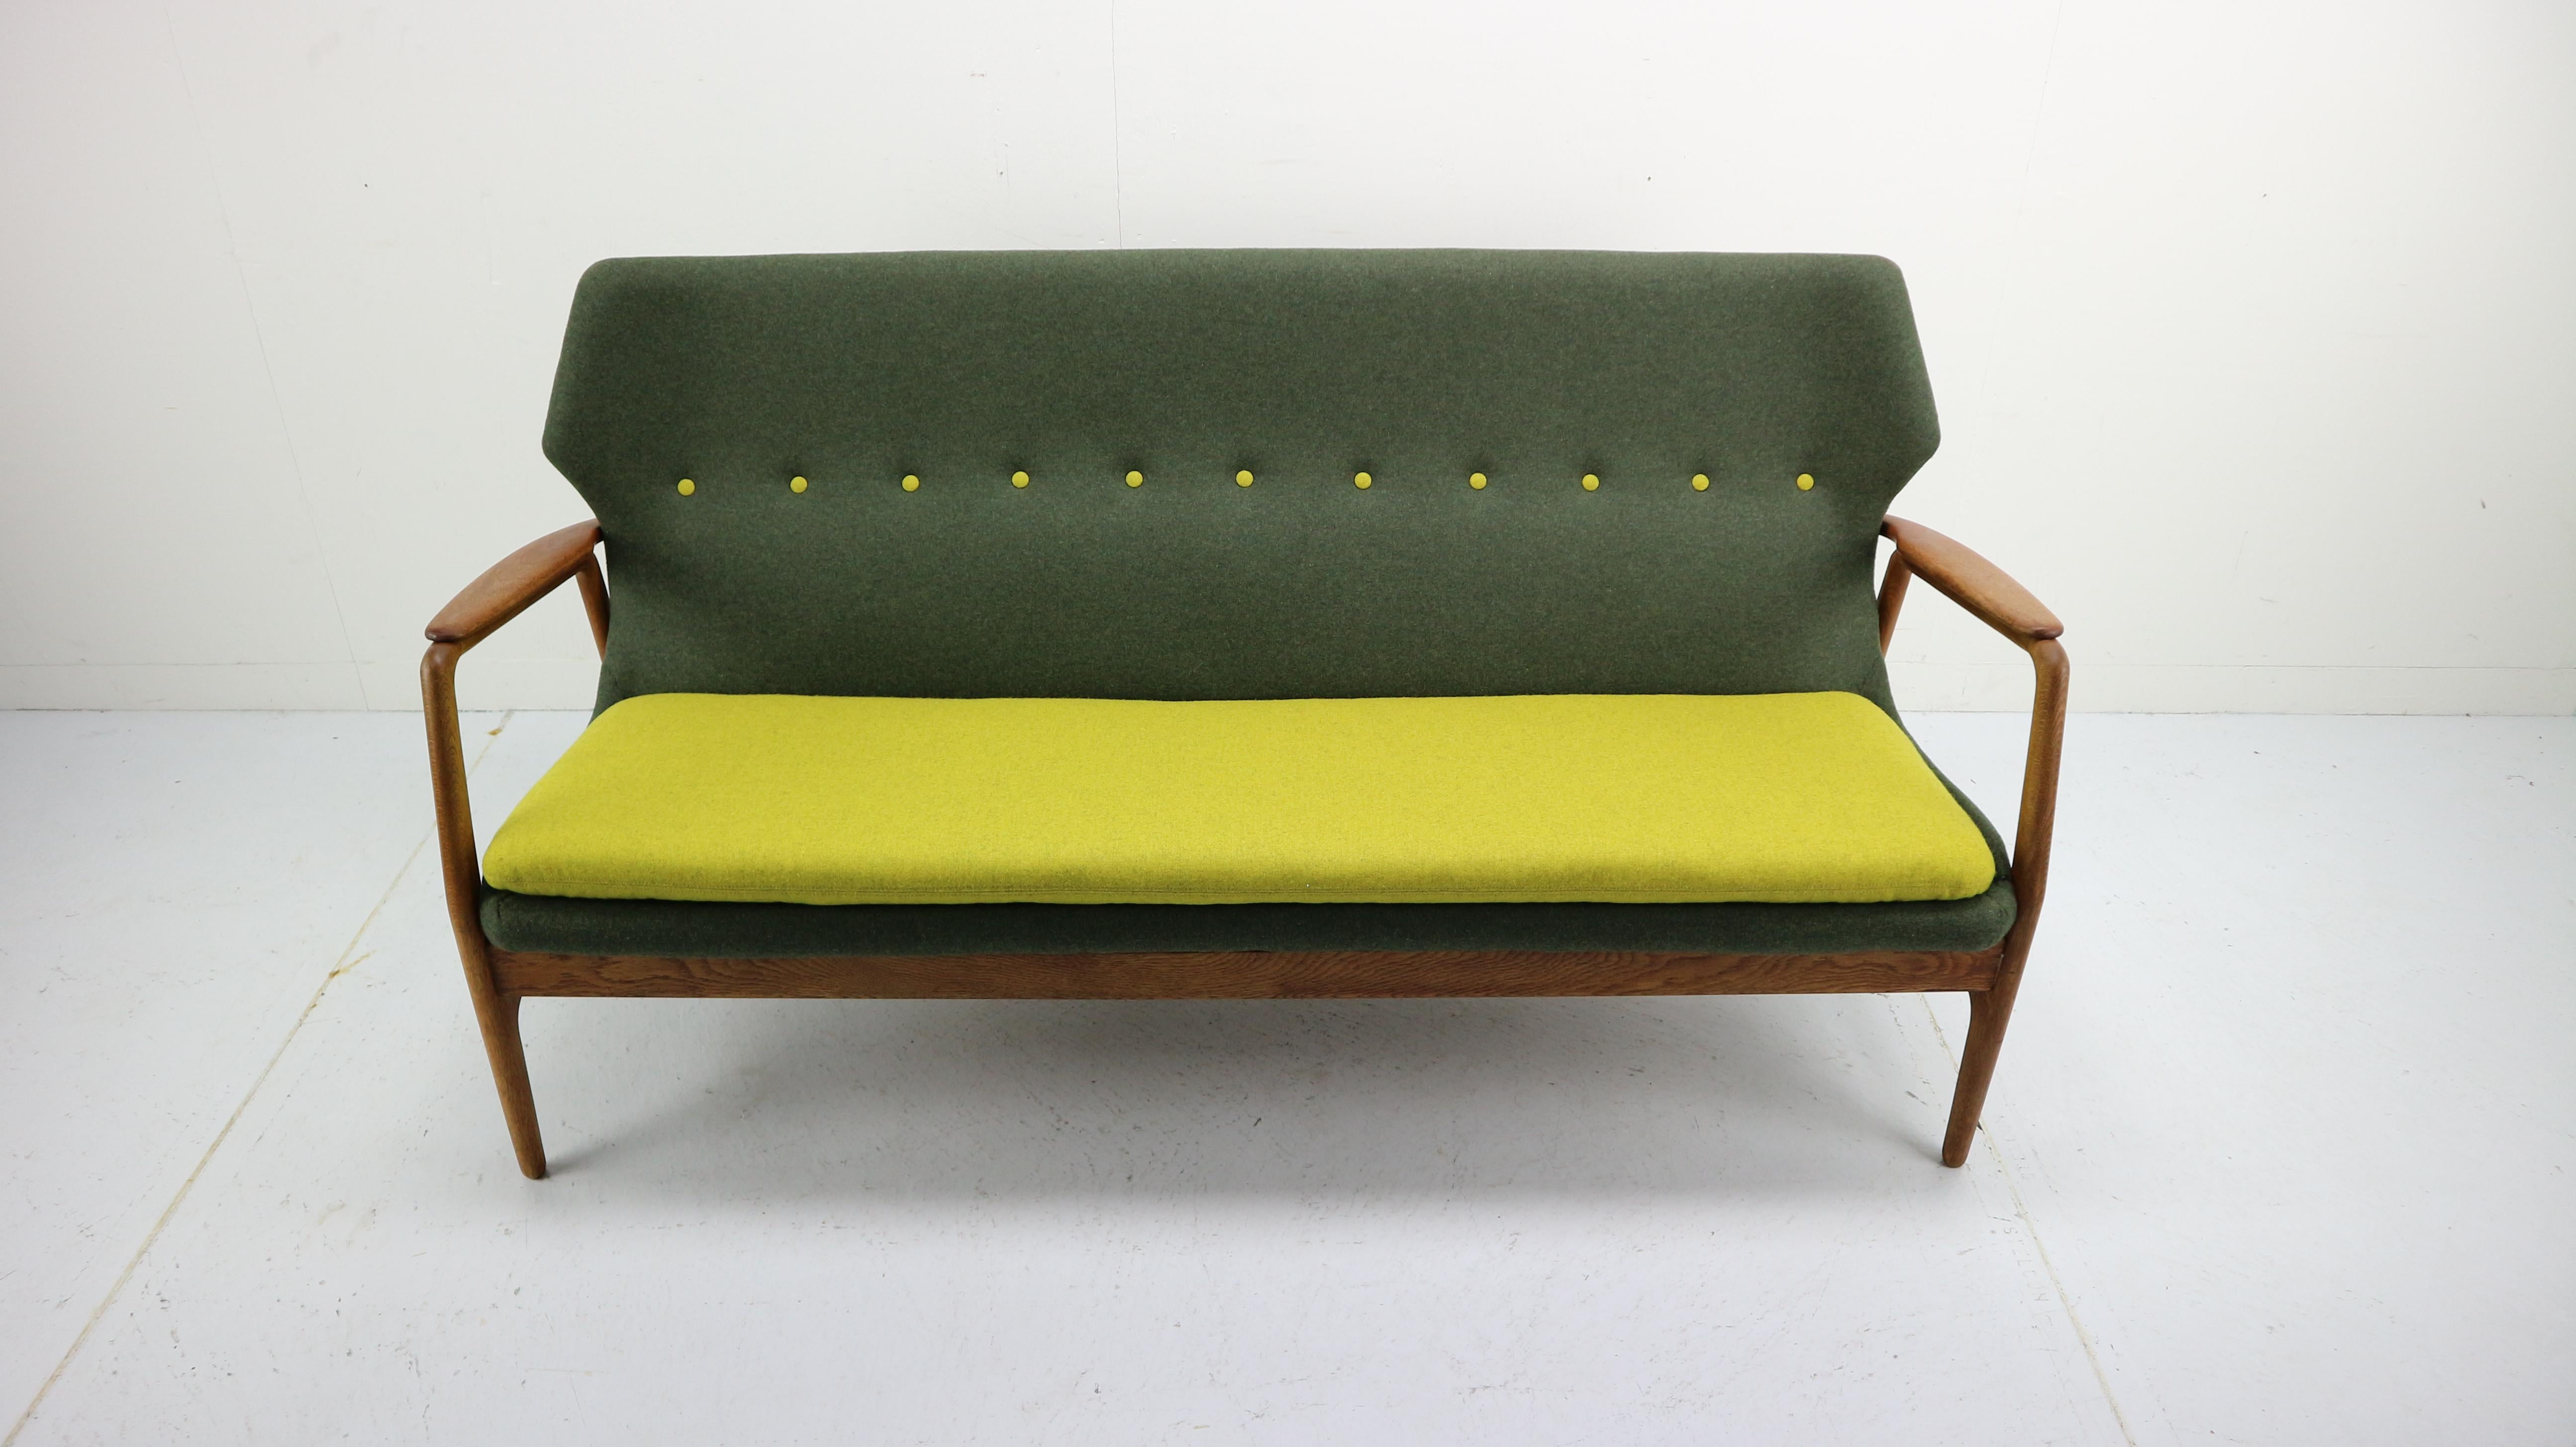 Lounge sofa wingback 3-seat, designed by Aksel Bender Madsen. Aksel Bender Madsen worked for Bovenkamp in the 1950s and 1960s, this sofa was produced in 1958. Madsen helped Bovenkamp to integrate Danish craftsmanship in their furniture making. Very